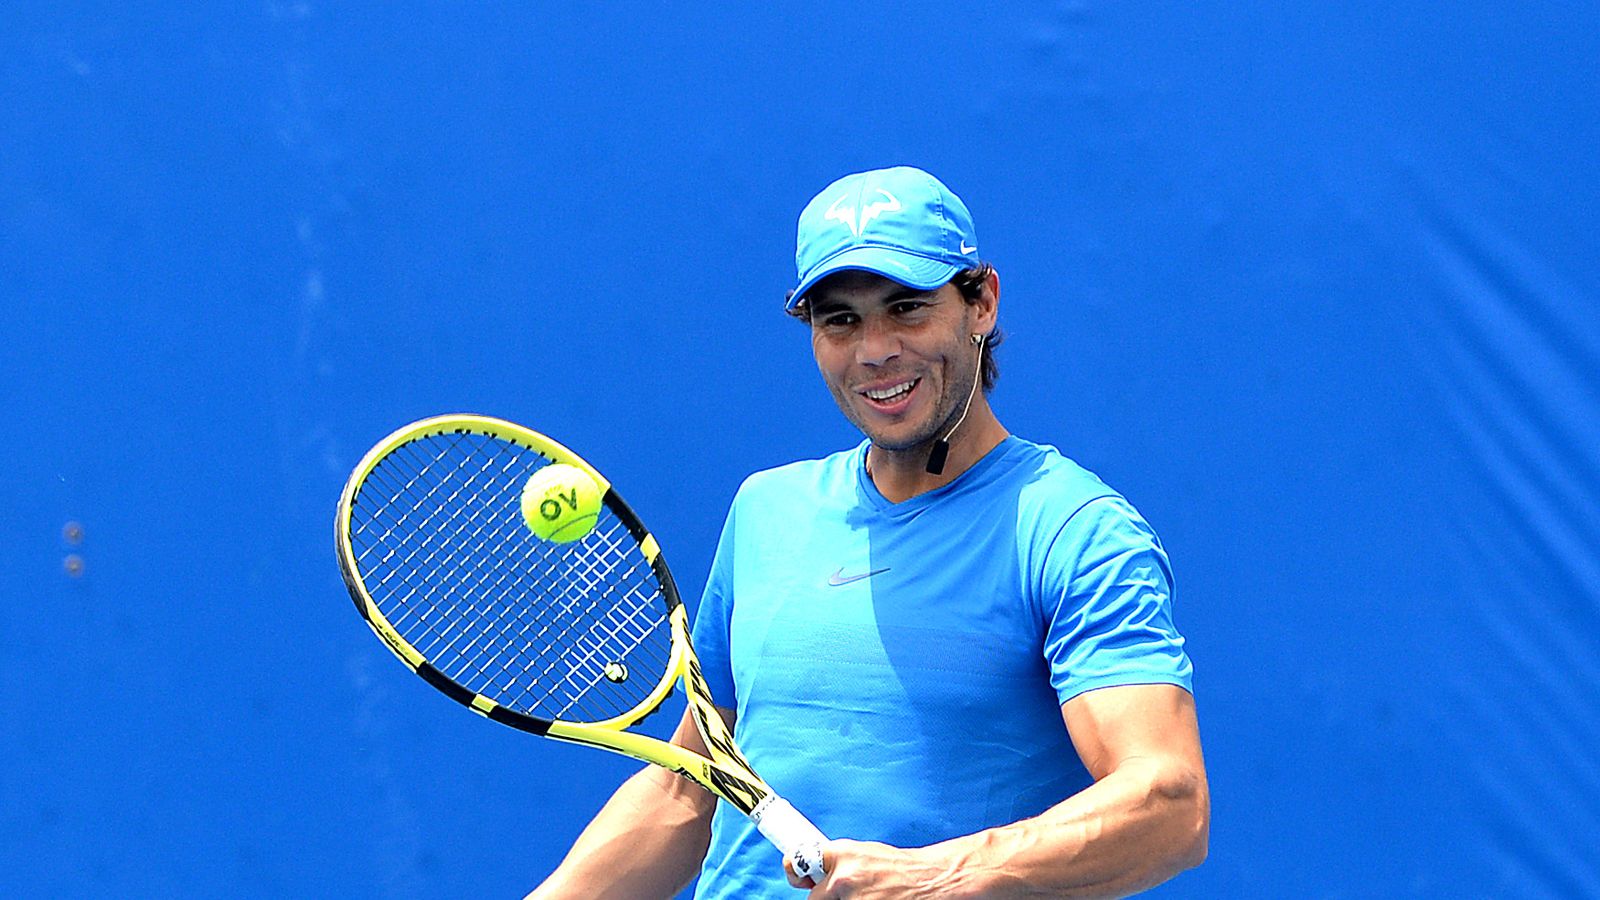 Rafael Nadal says he's healthy and pain free ahead of ...